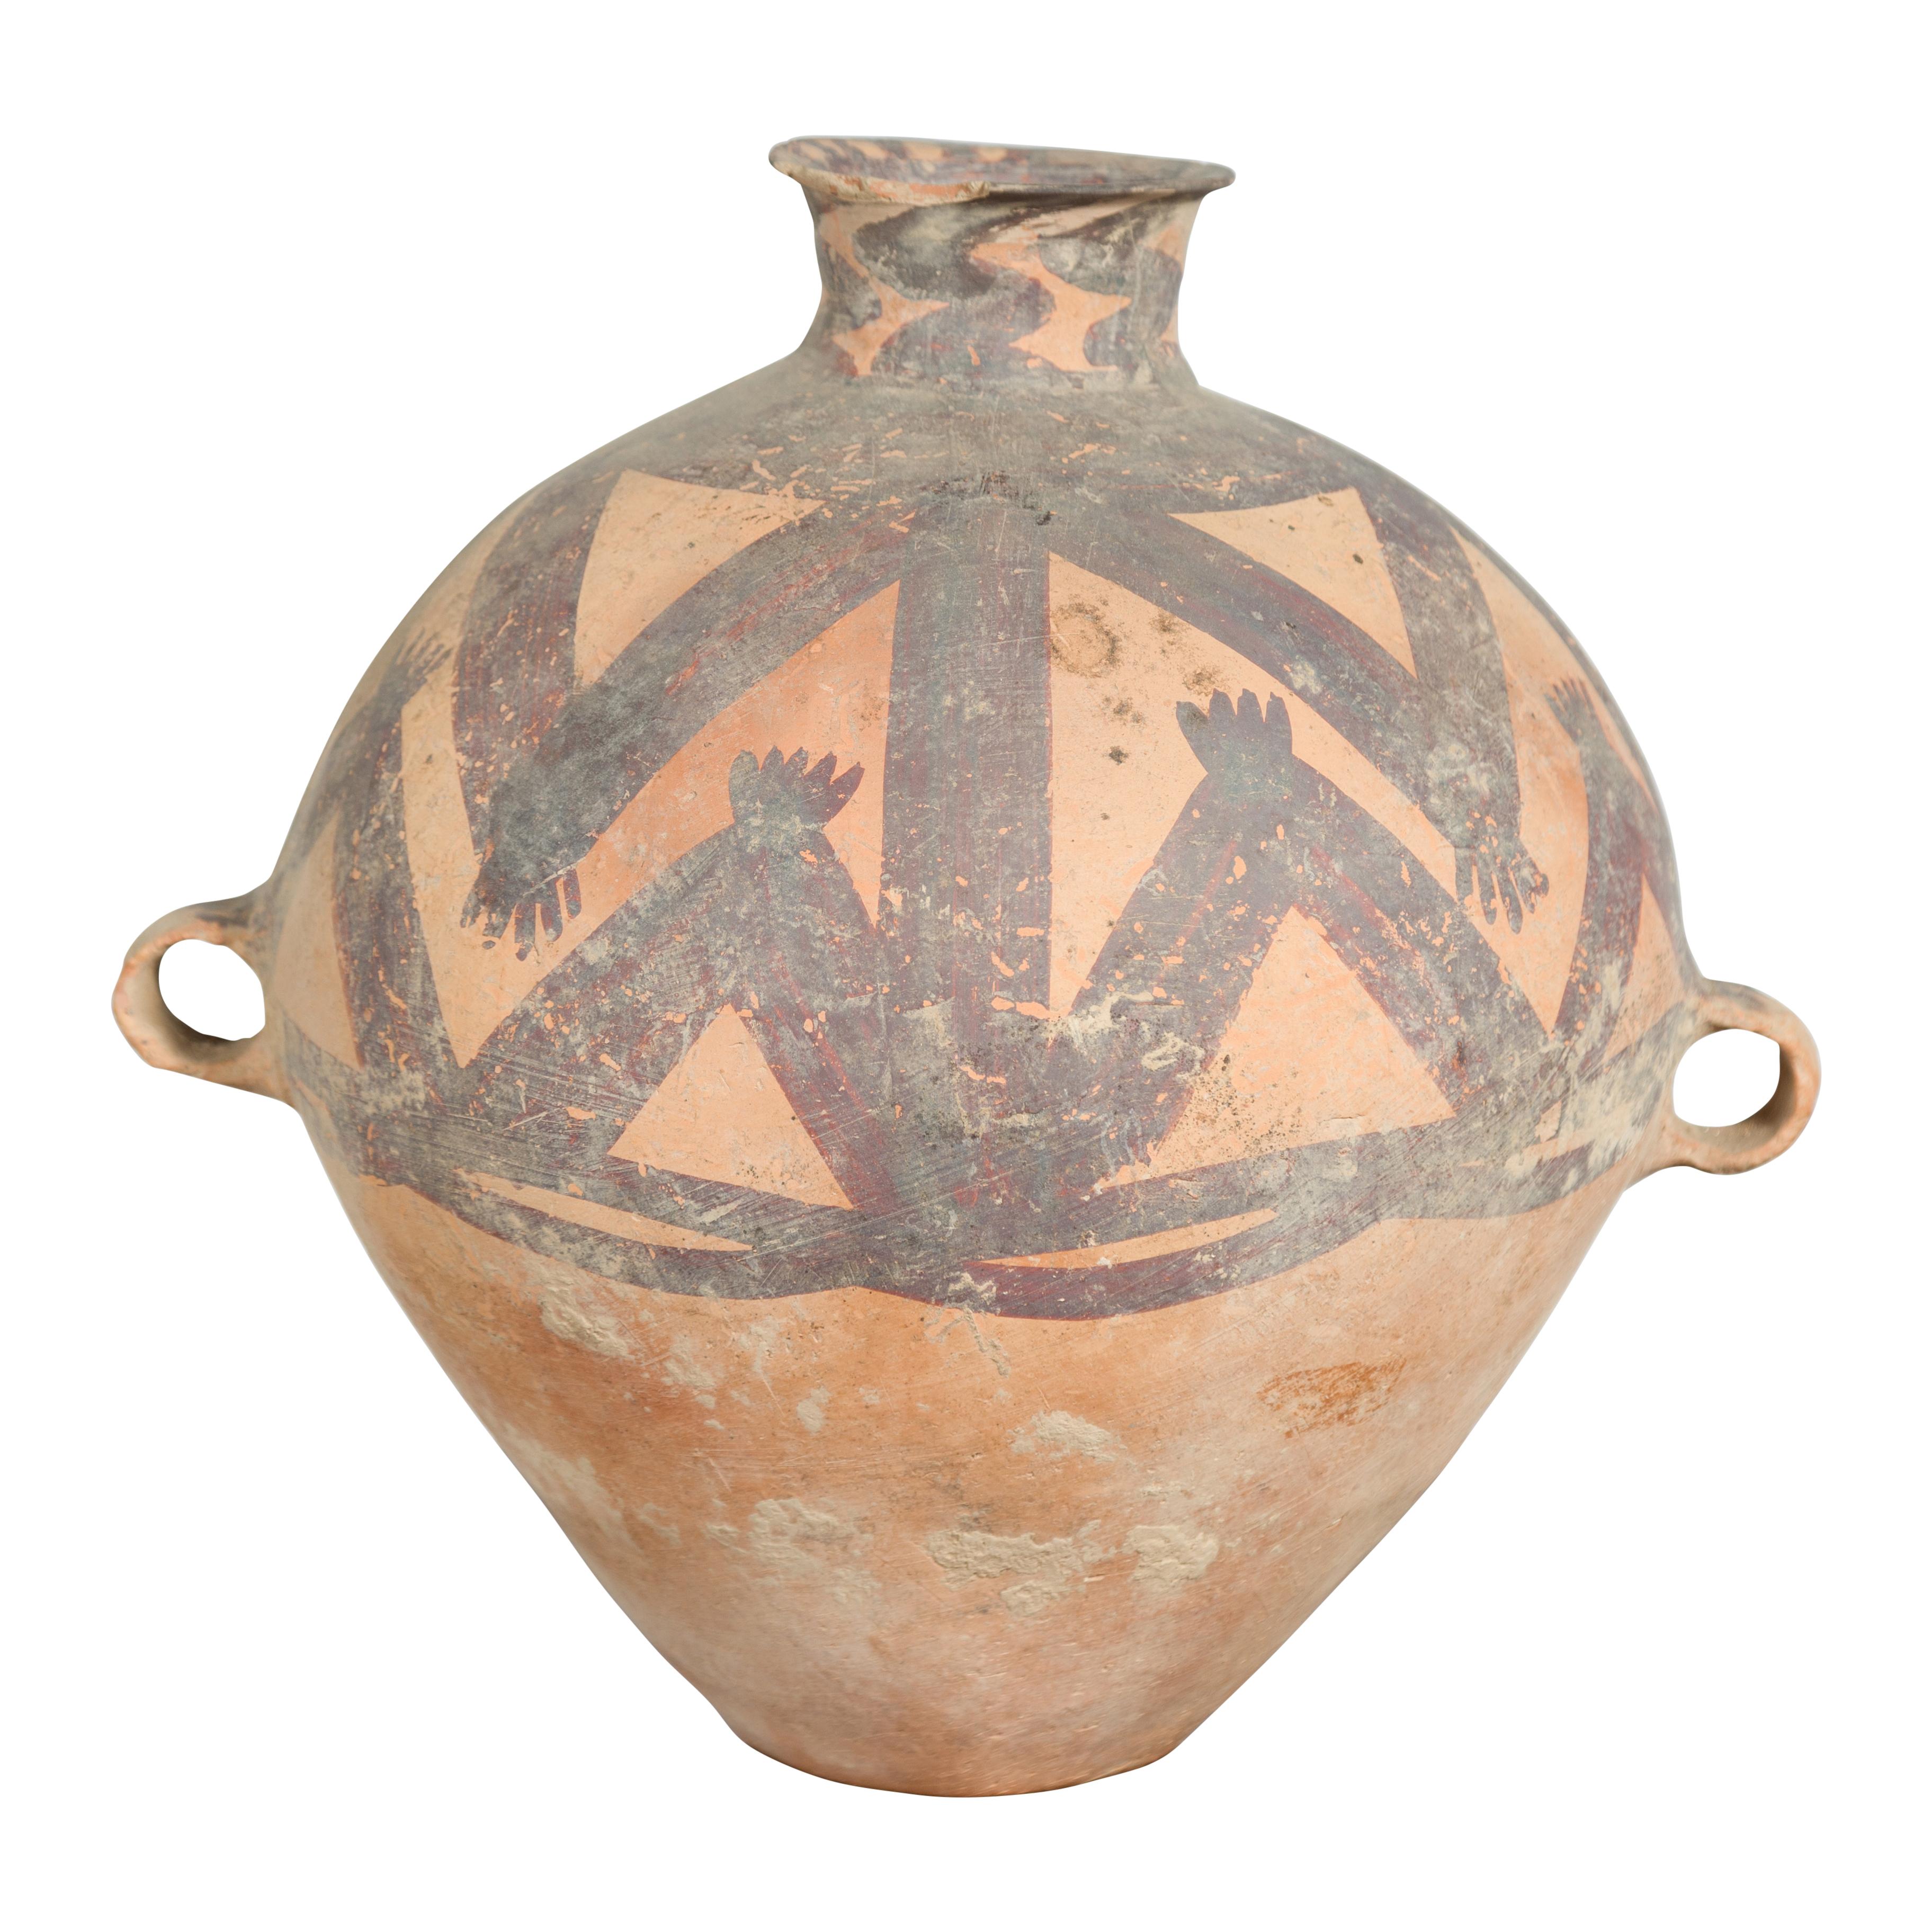 Chinese Neolithic Period 4000 BC Terracotta Storage Jar with Geometric Décor 12